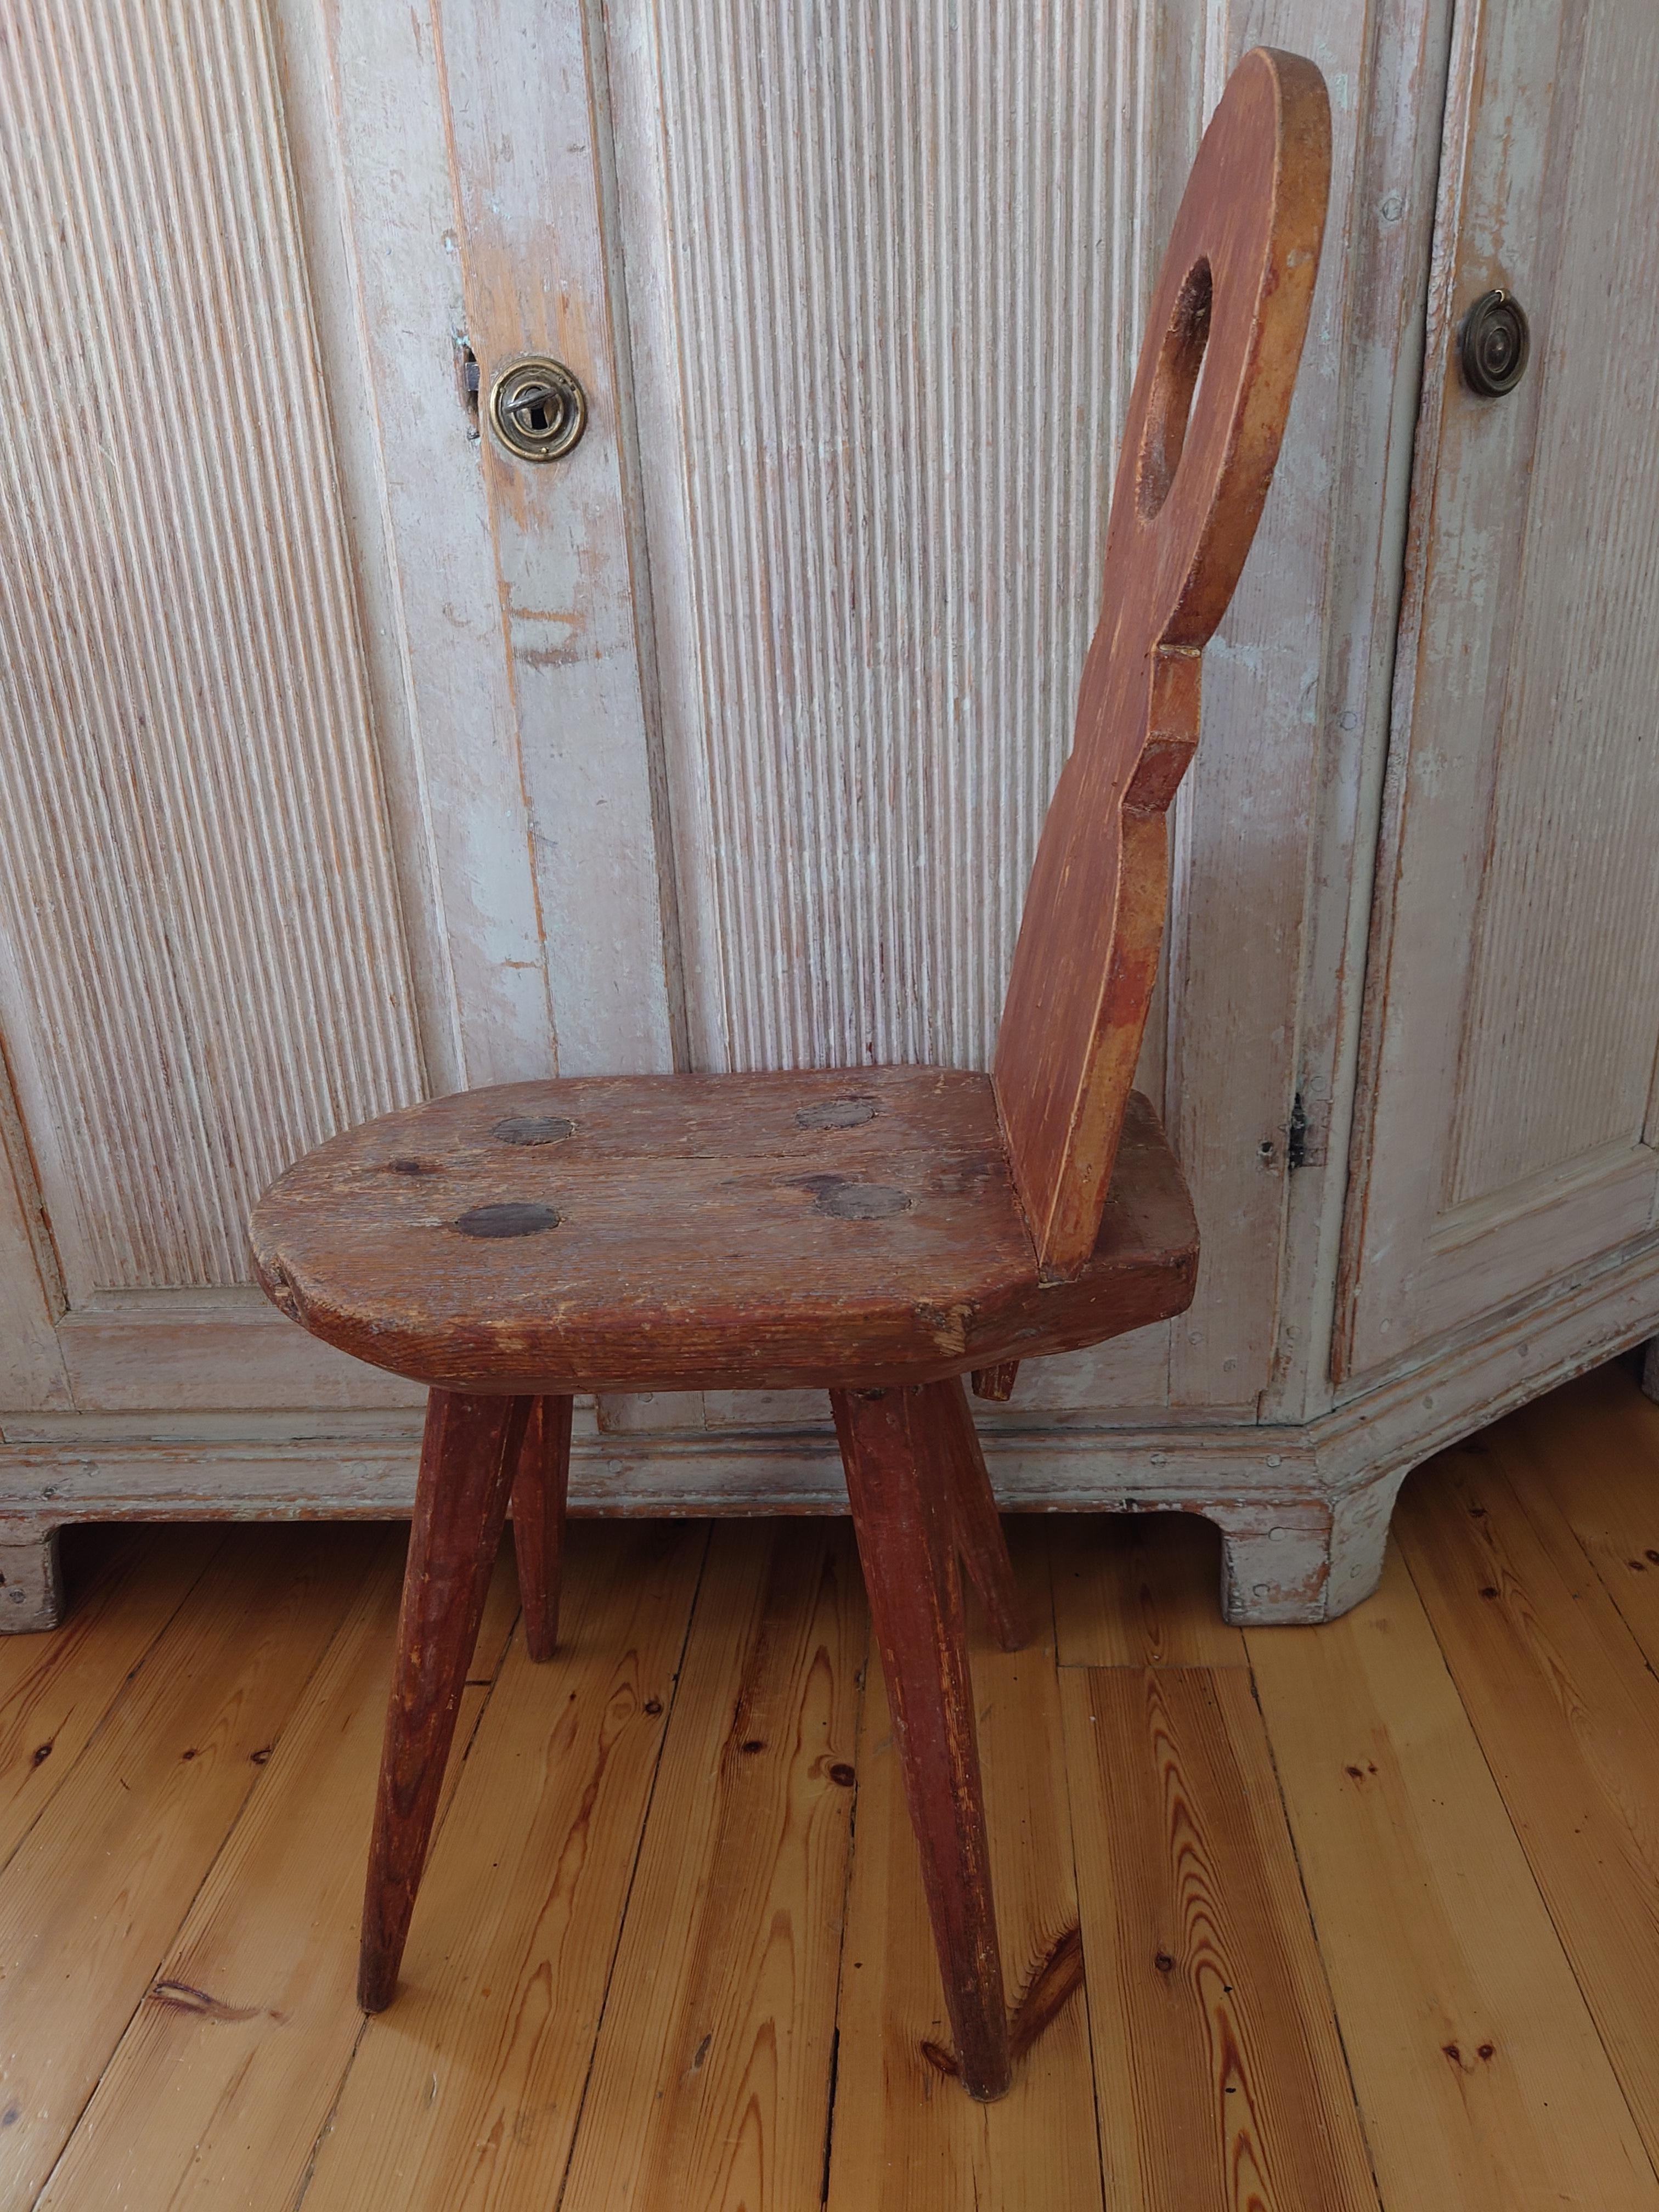 Late 18th Century Swedish Antique Country Rustic Folk Art Chair  For Sale 6